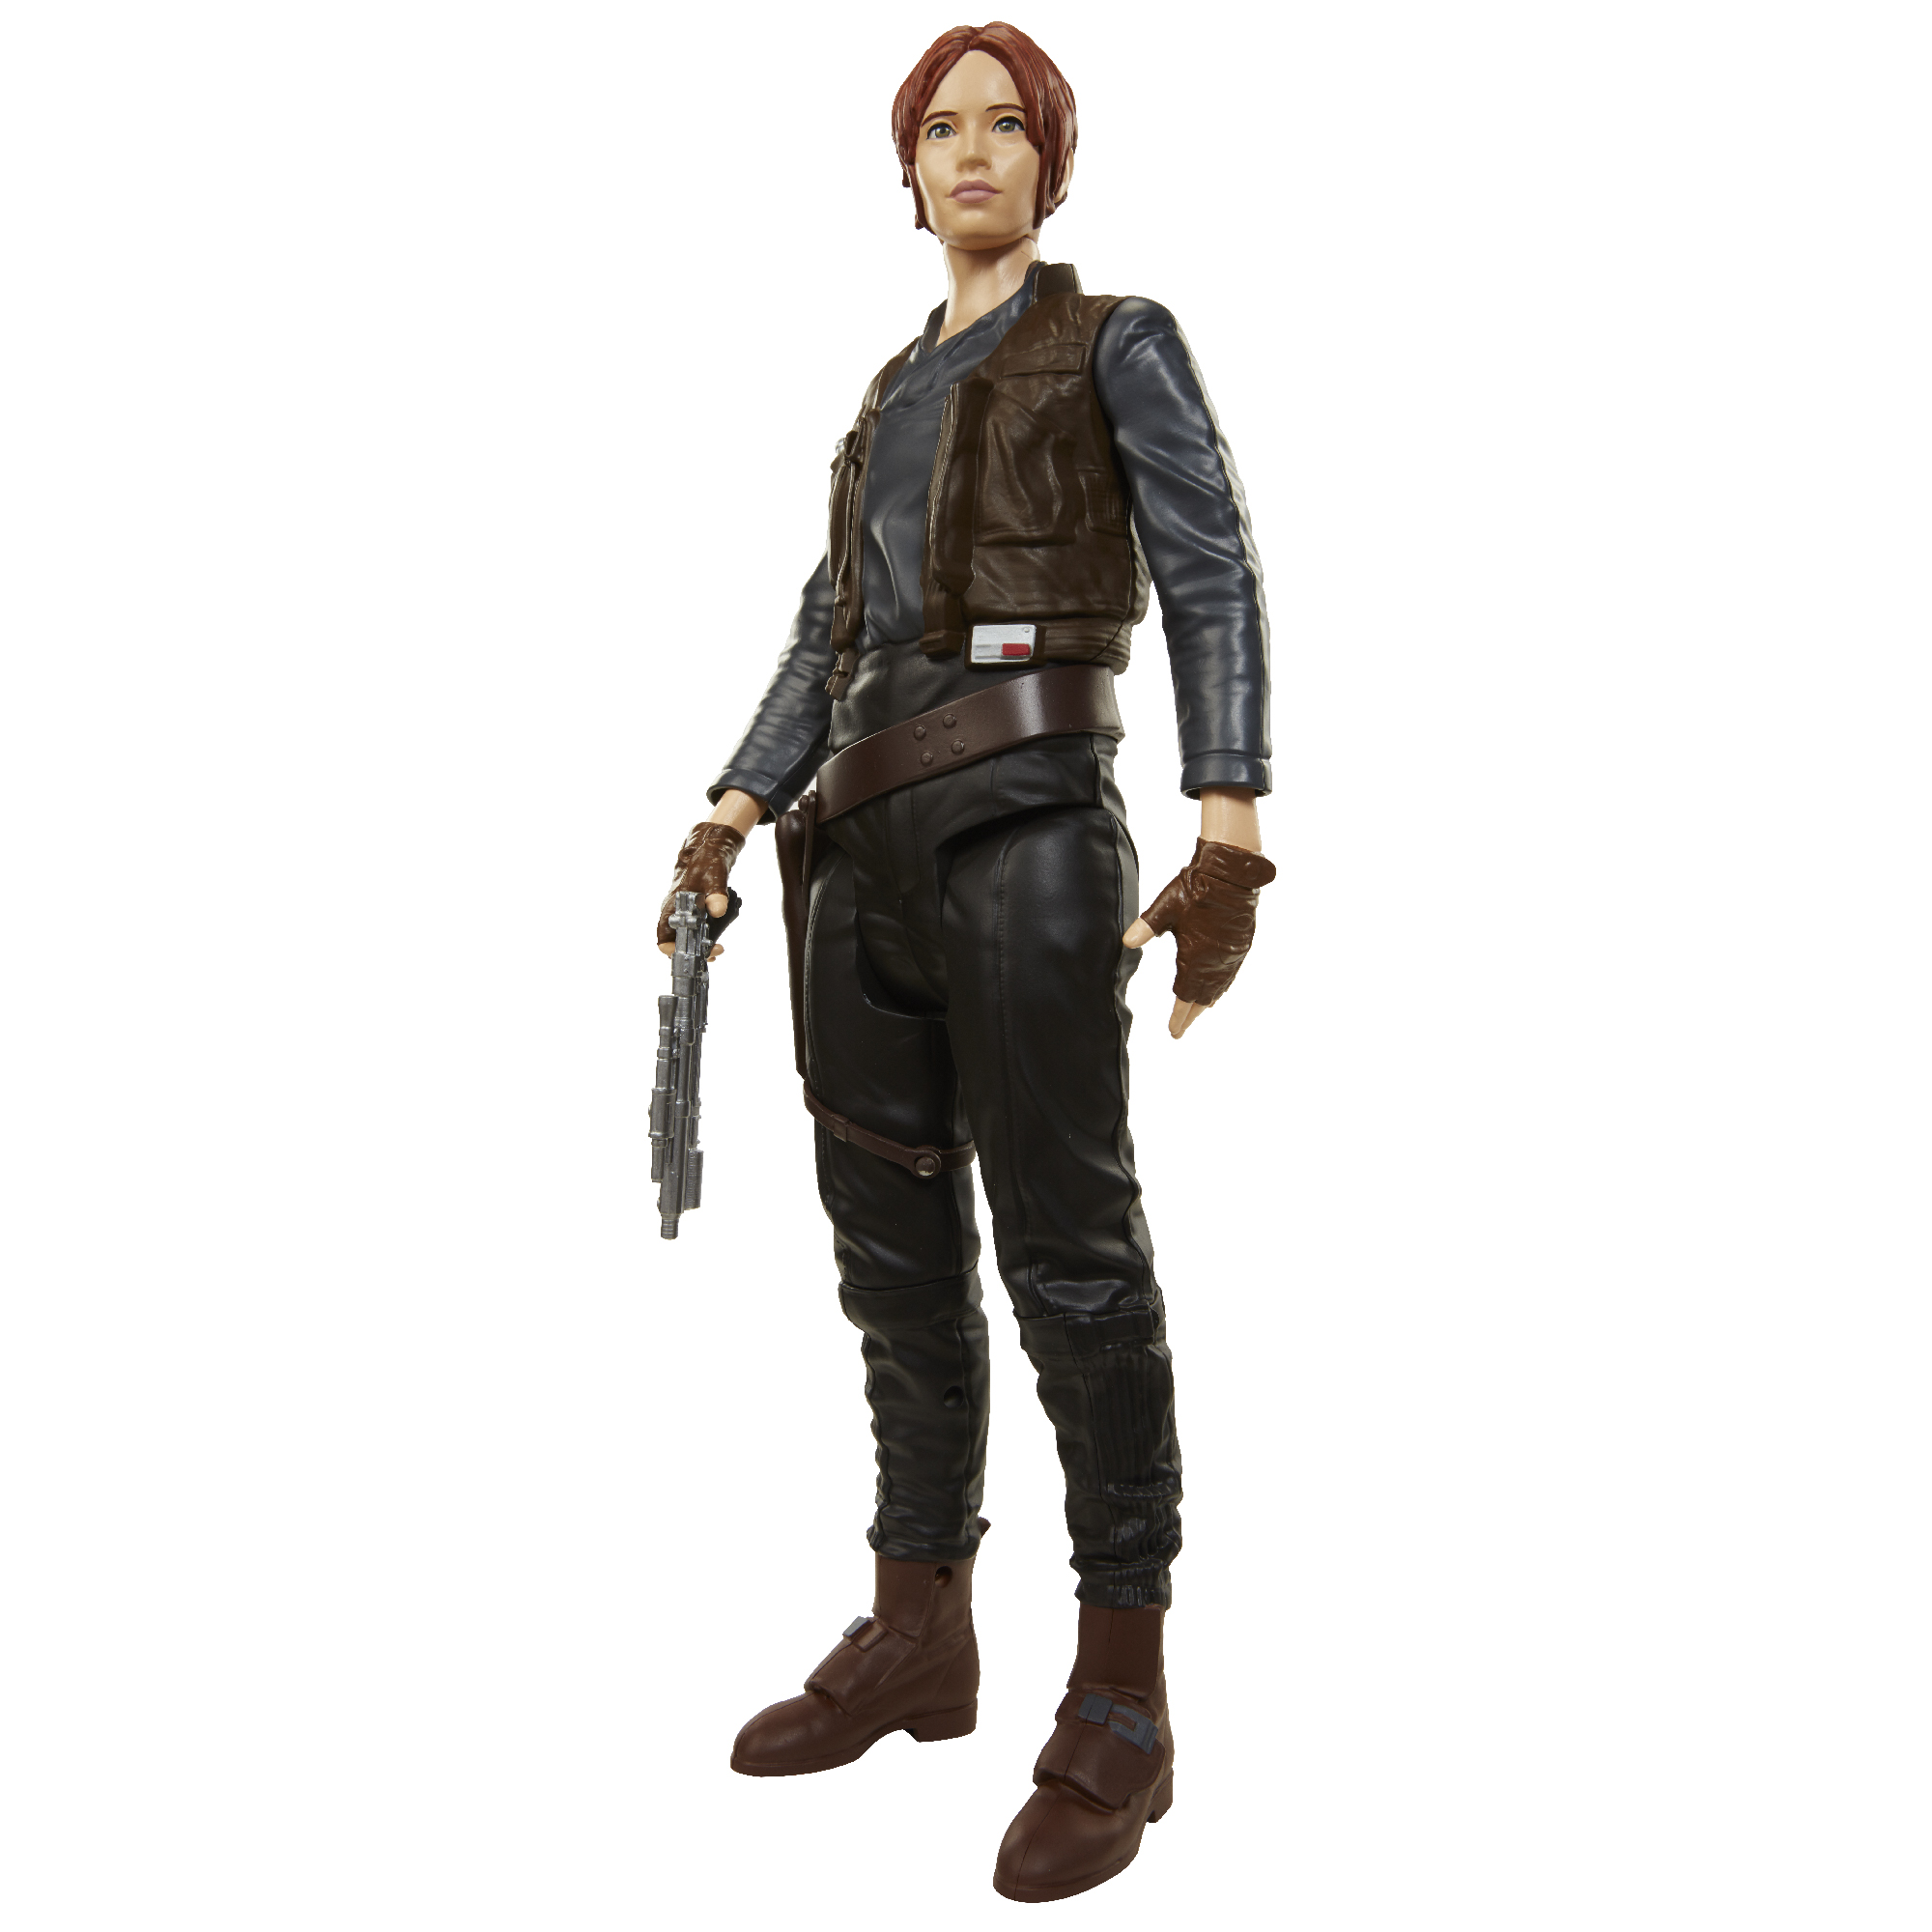 PHOTO: A "Rogue One: A Star Wars Story" Jyn Erso action figure from Jakks Pacific is seen here.